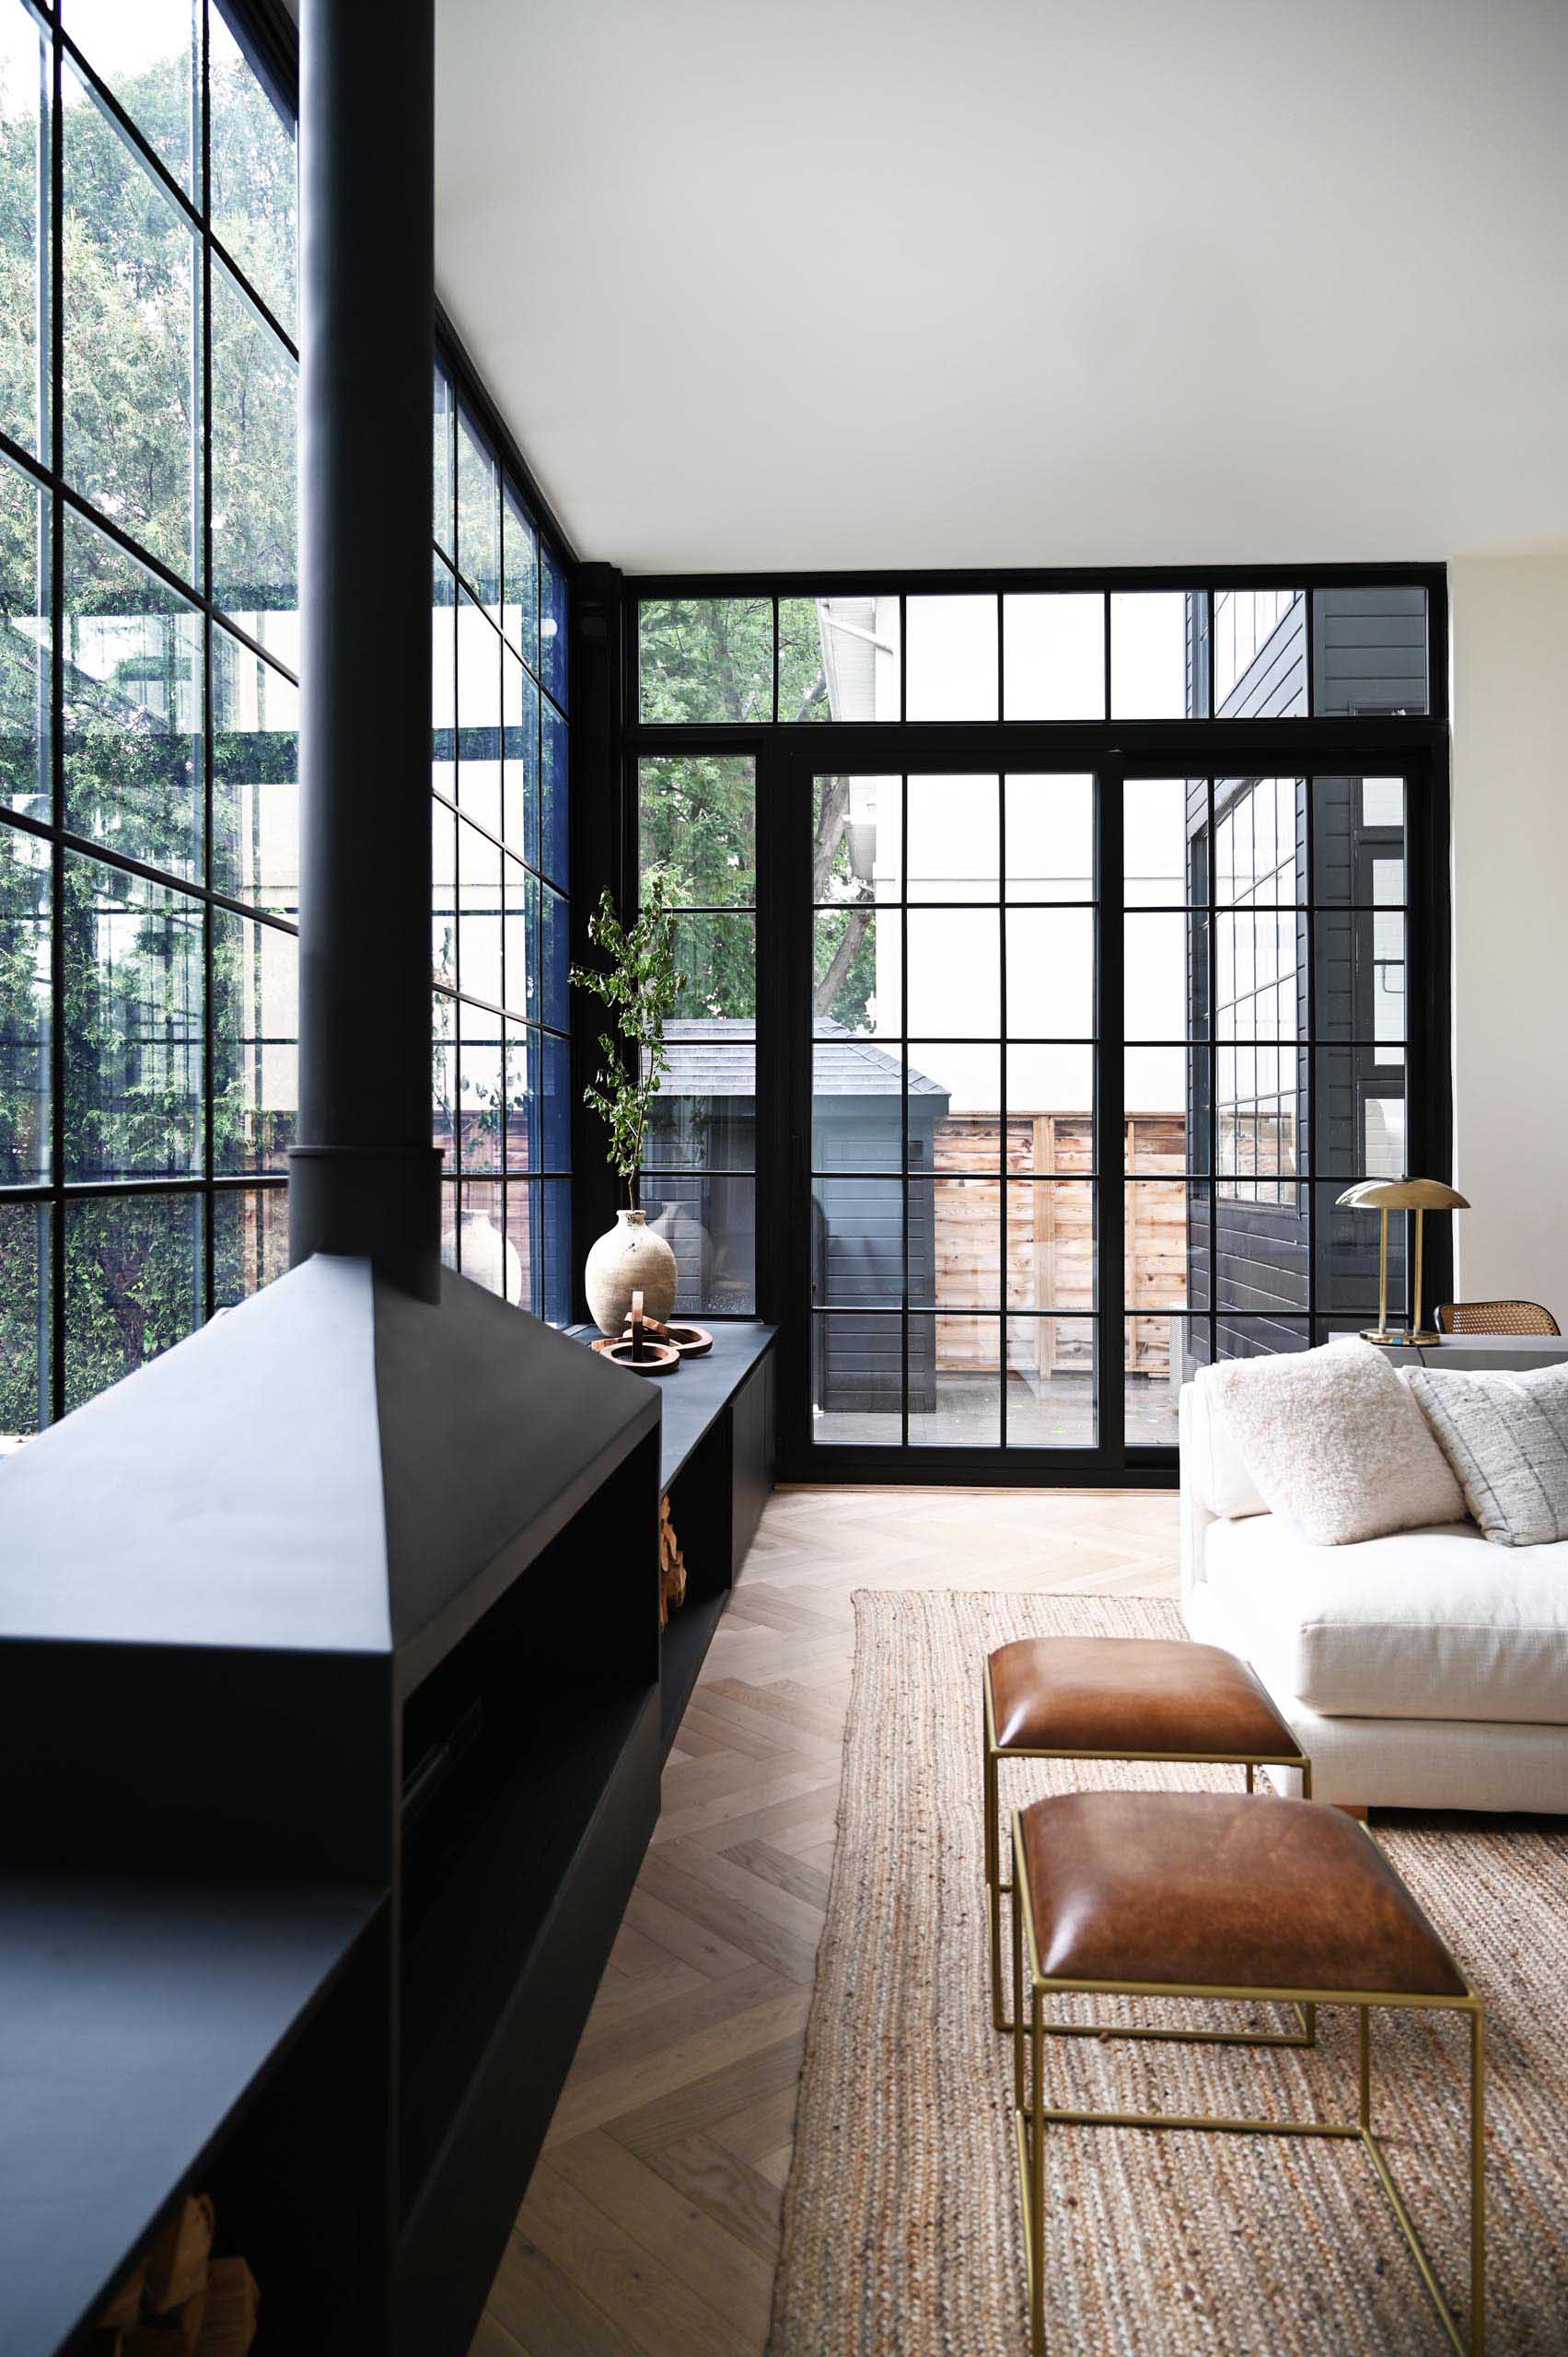 The expansive wall-to-wall black-framed windows and door frames complement the interior of the living room, that showcases a matte black fireplace and window bench. Also included in the design of the window bench is firewood storage.